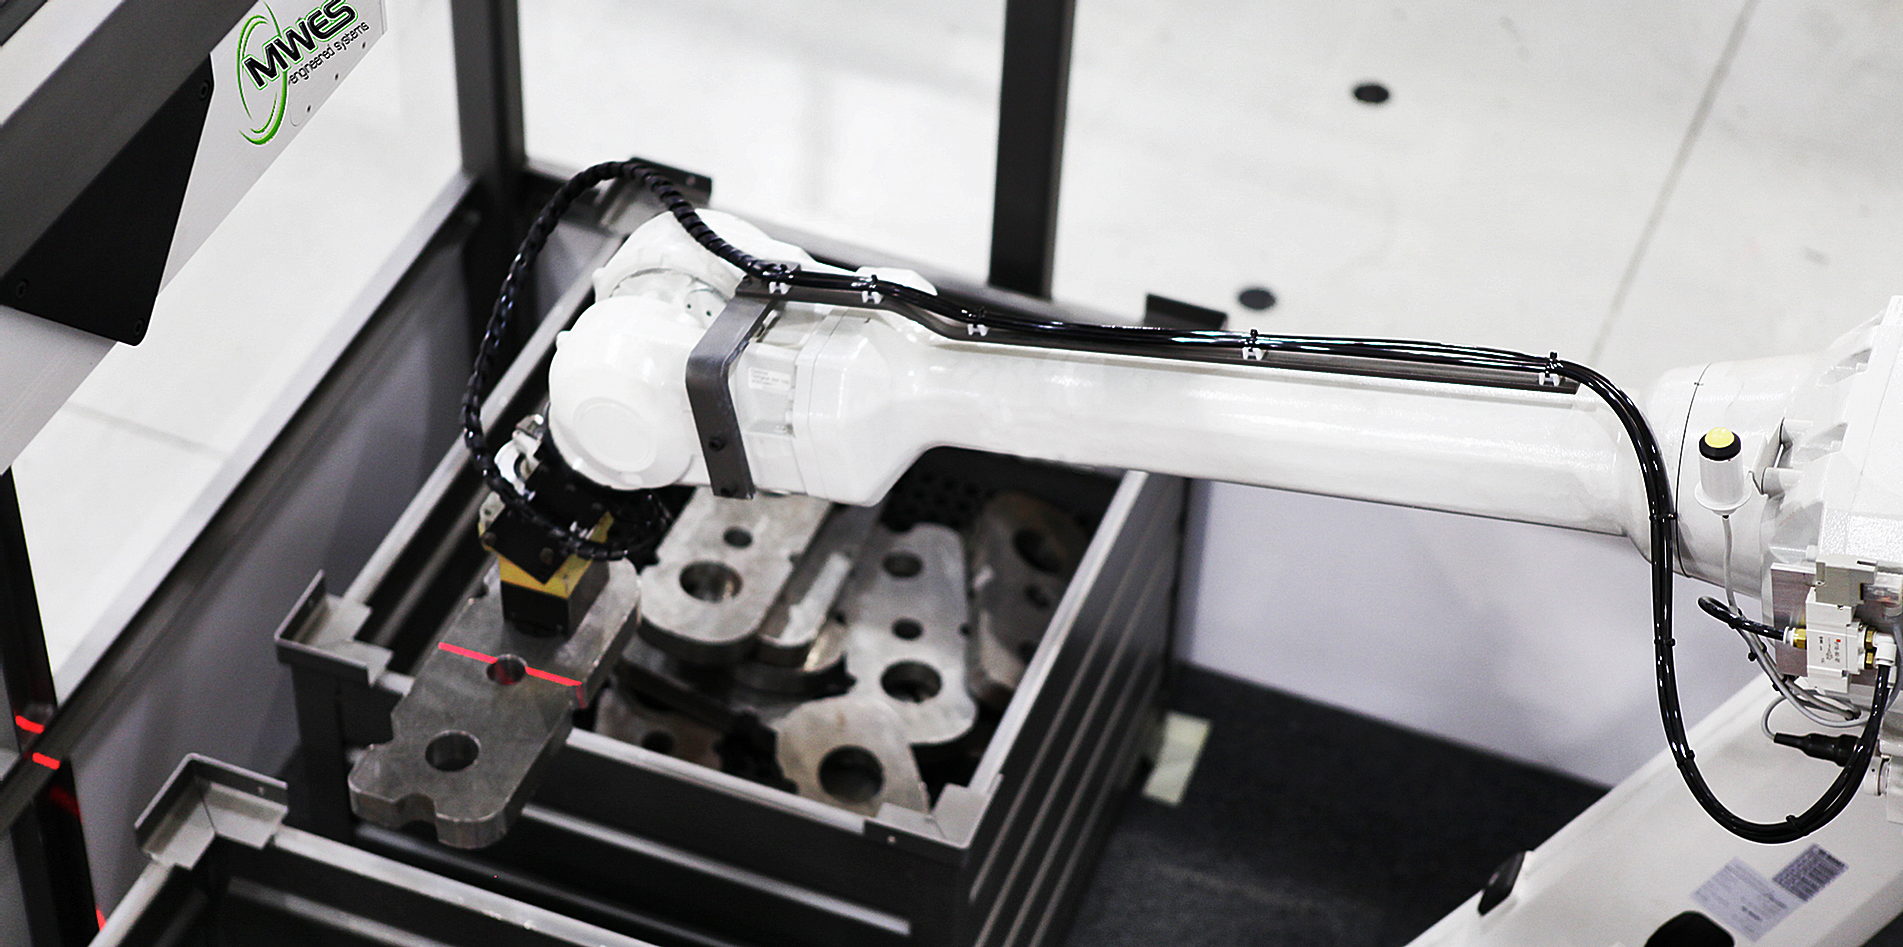 Tips for Maintaining Your Industrial Robots